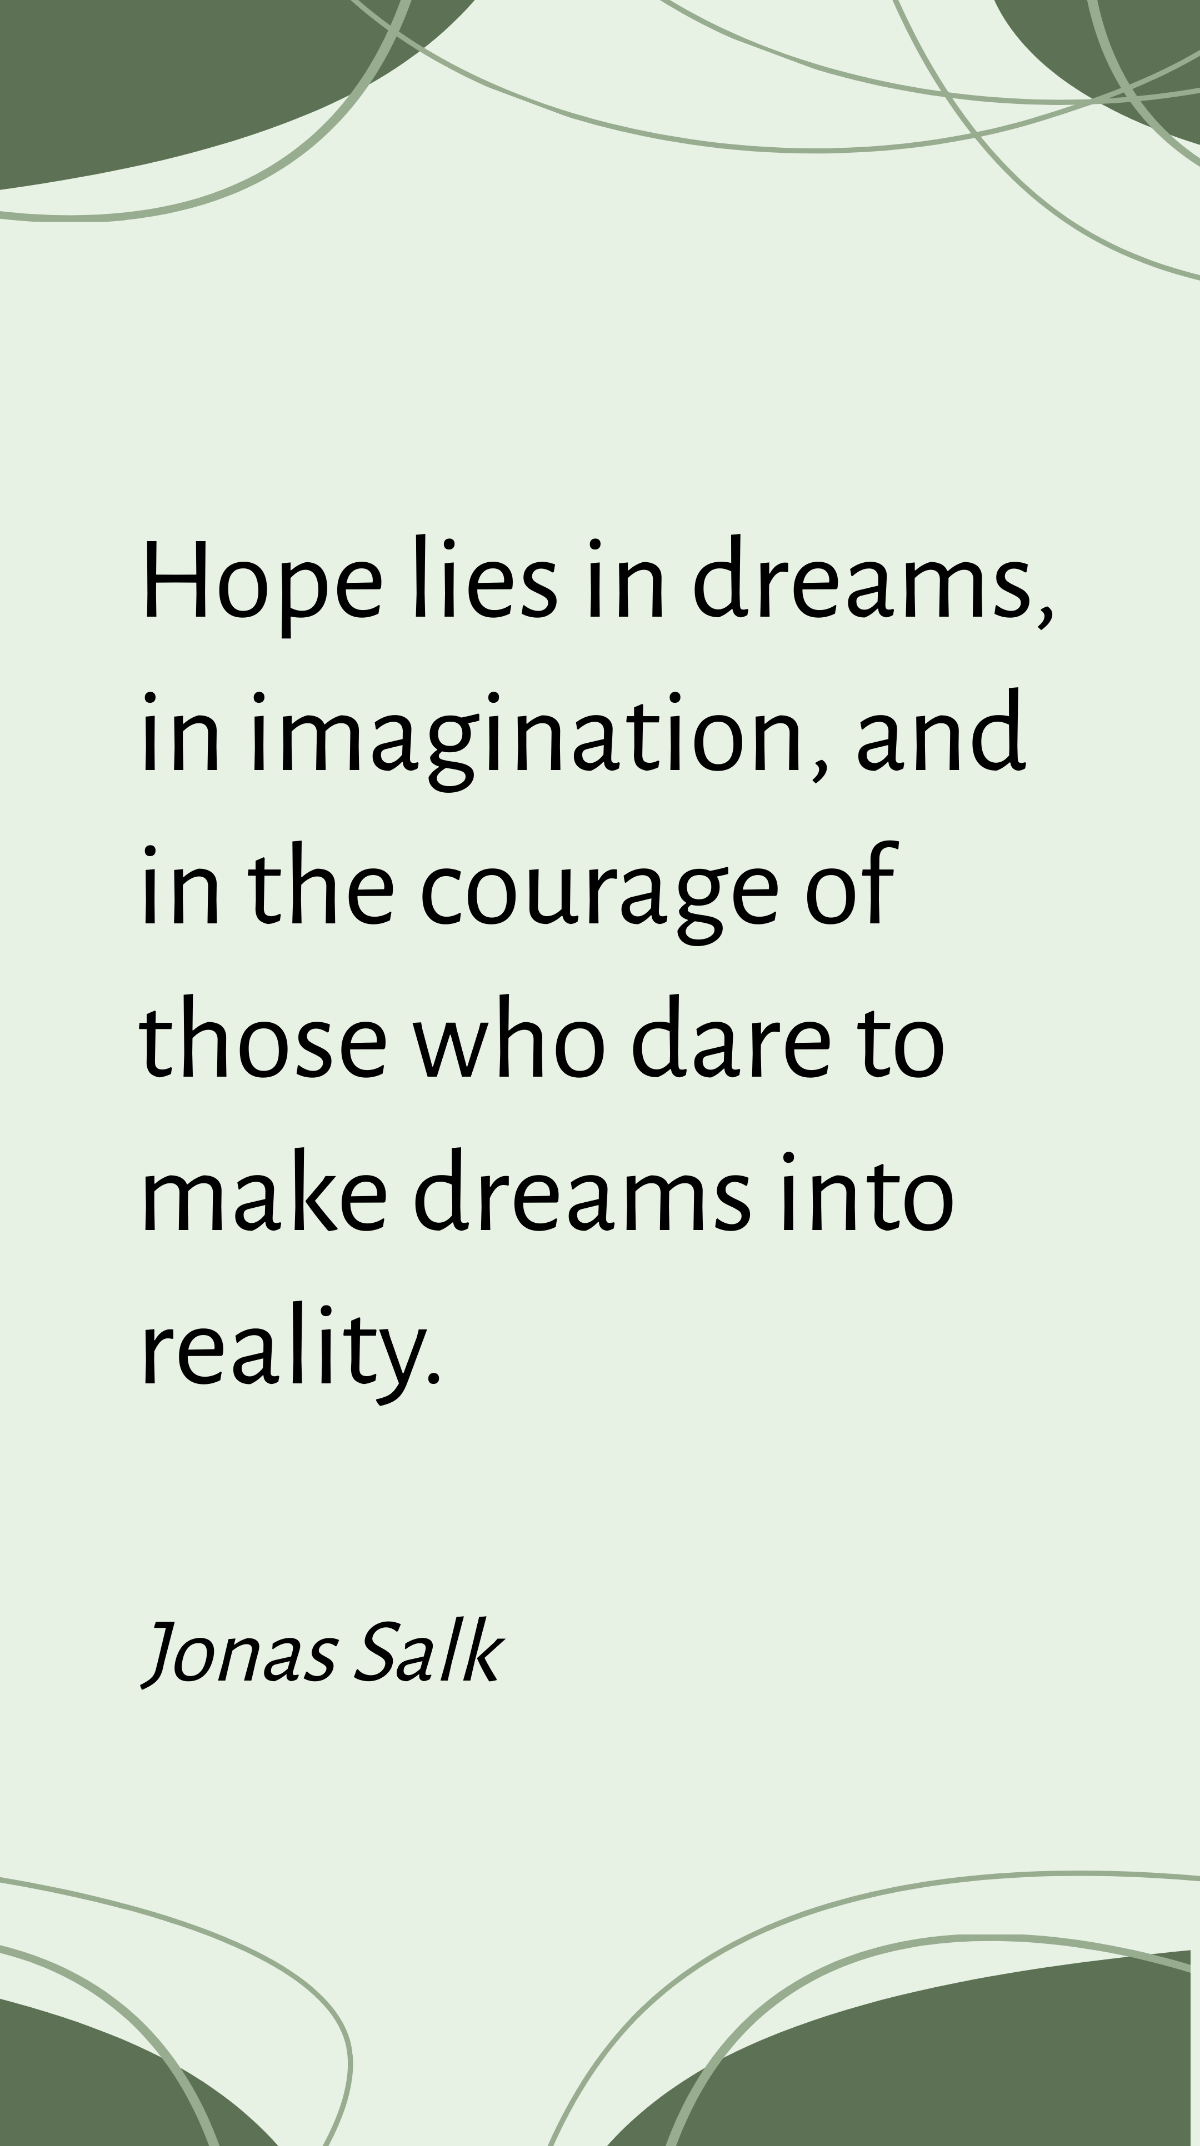 Jonas Salk - Hope lies in dreams, in imagination, and in the courage of those who dare to make dreams into reality. Template